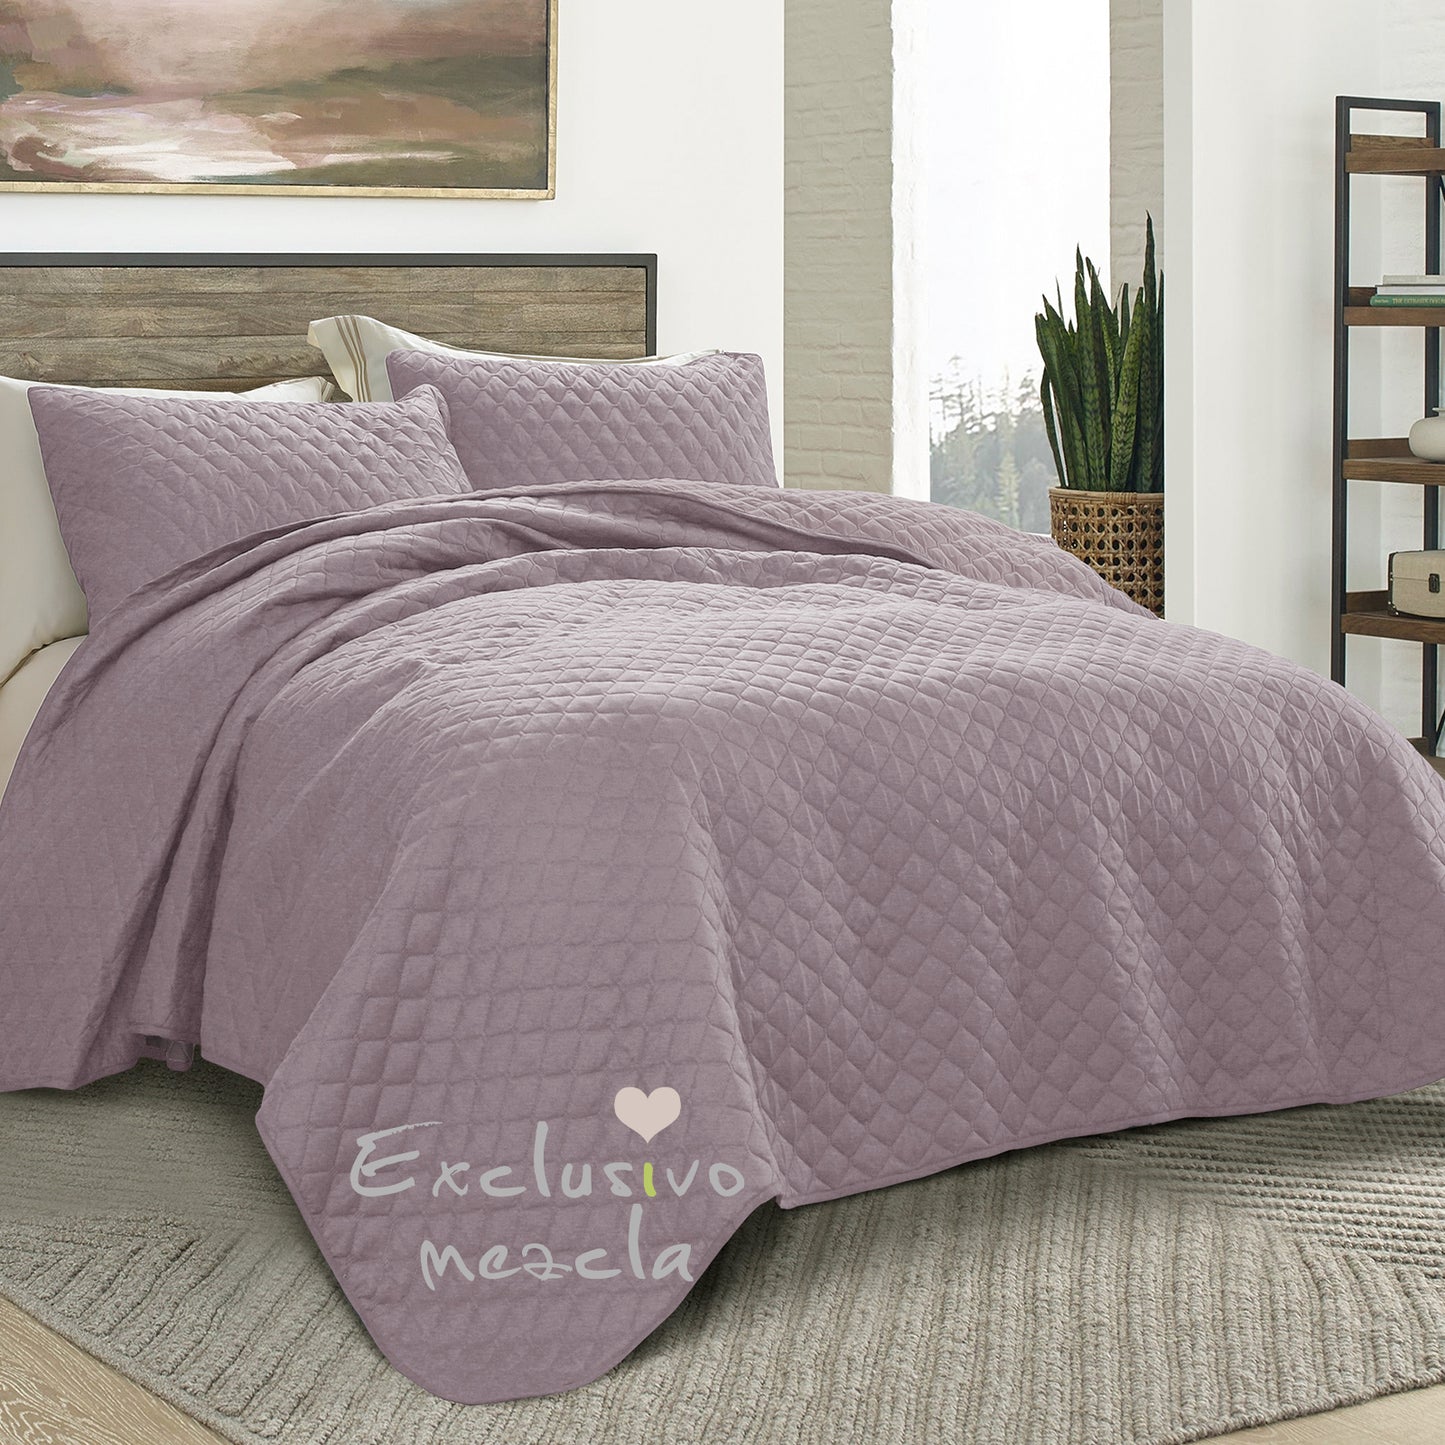 Exclusivo Mezcla Ultrasonic Reversible Twin Quilt Bedding Set with Pillow Sham, Lightweight Quilts Twin Size, Soft Bedspreads Bed Coverlets for All Seasons - (Lilac Ash, 68"x88")